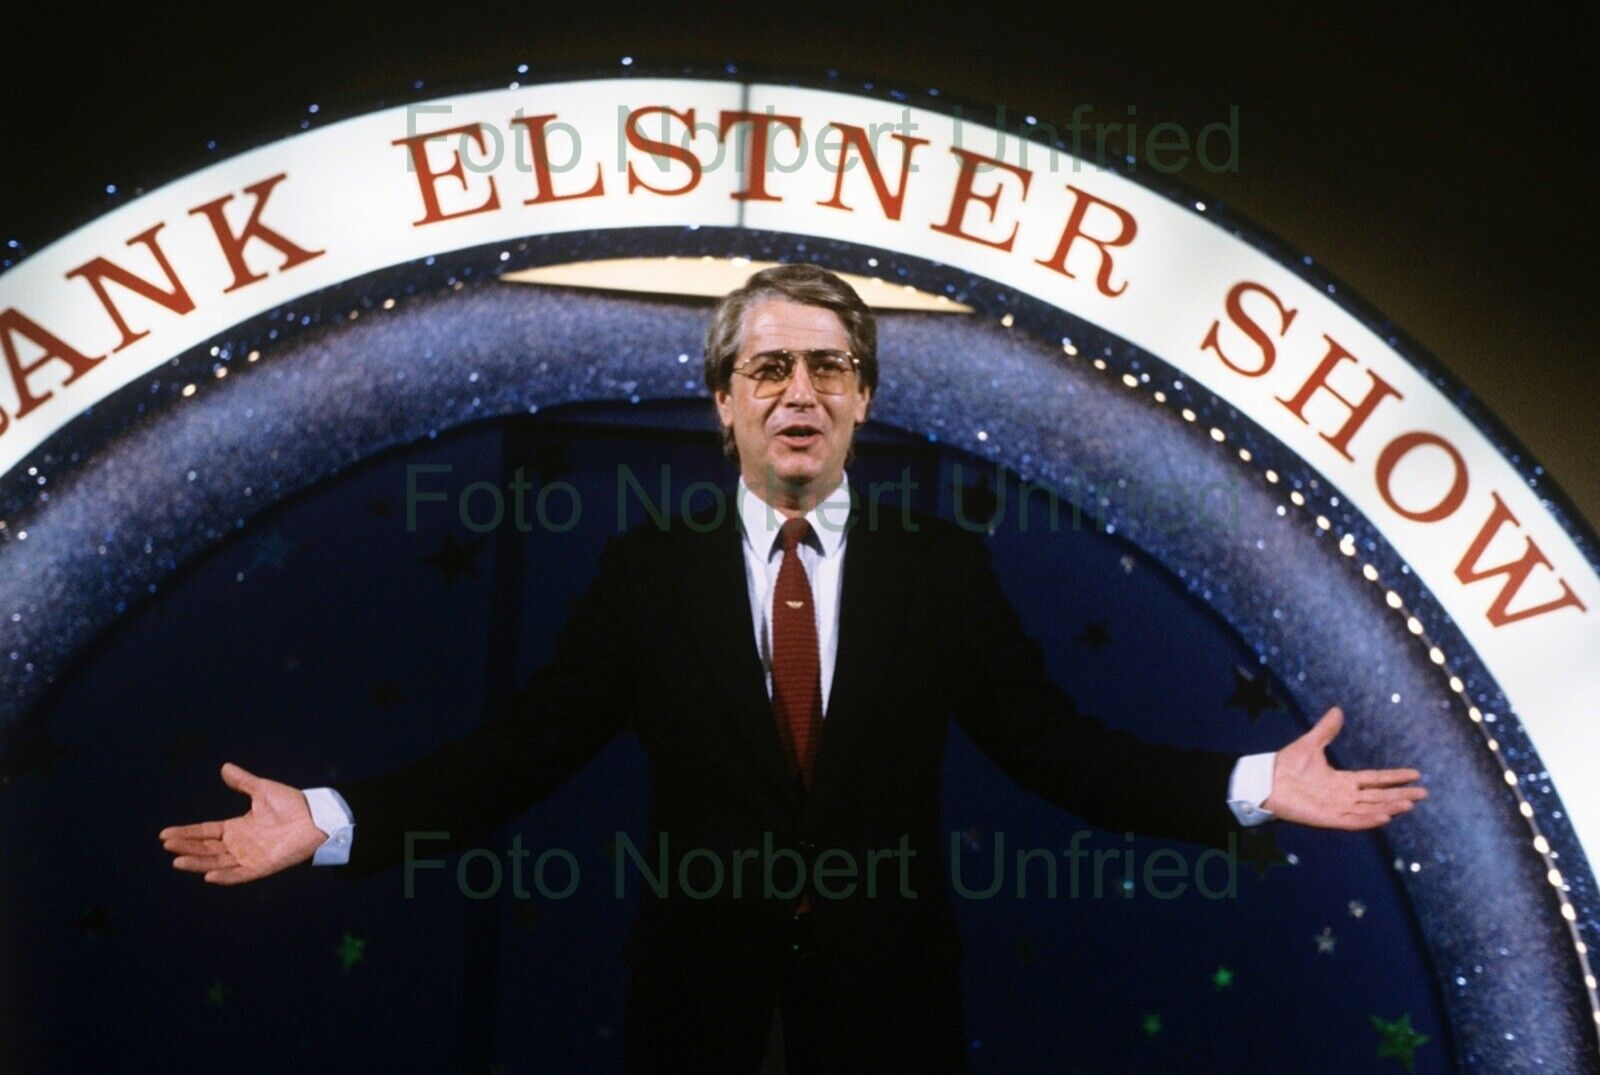 Frank Elstner 10 X 15 CM Photo Poster painting Without Autograph (Star-10